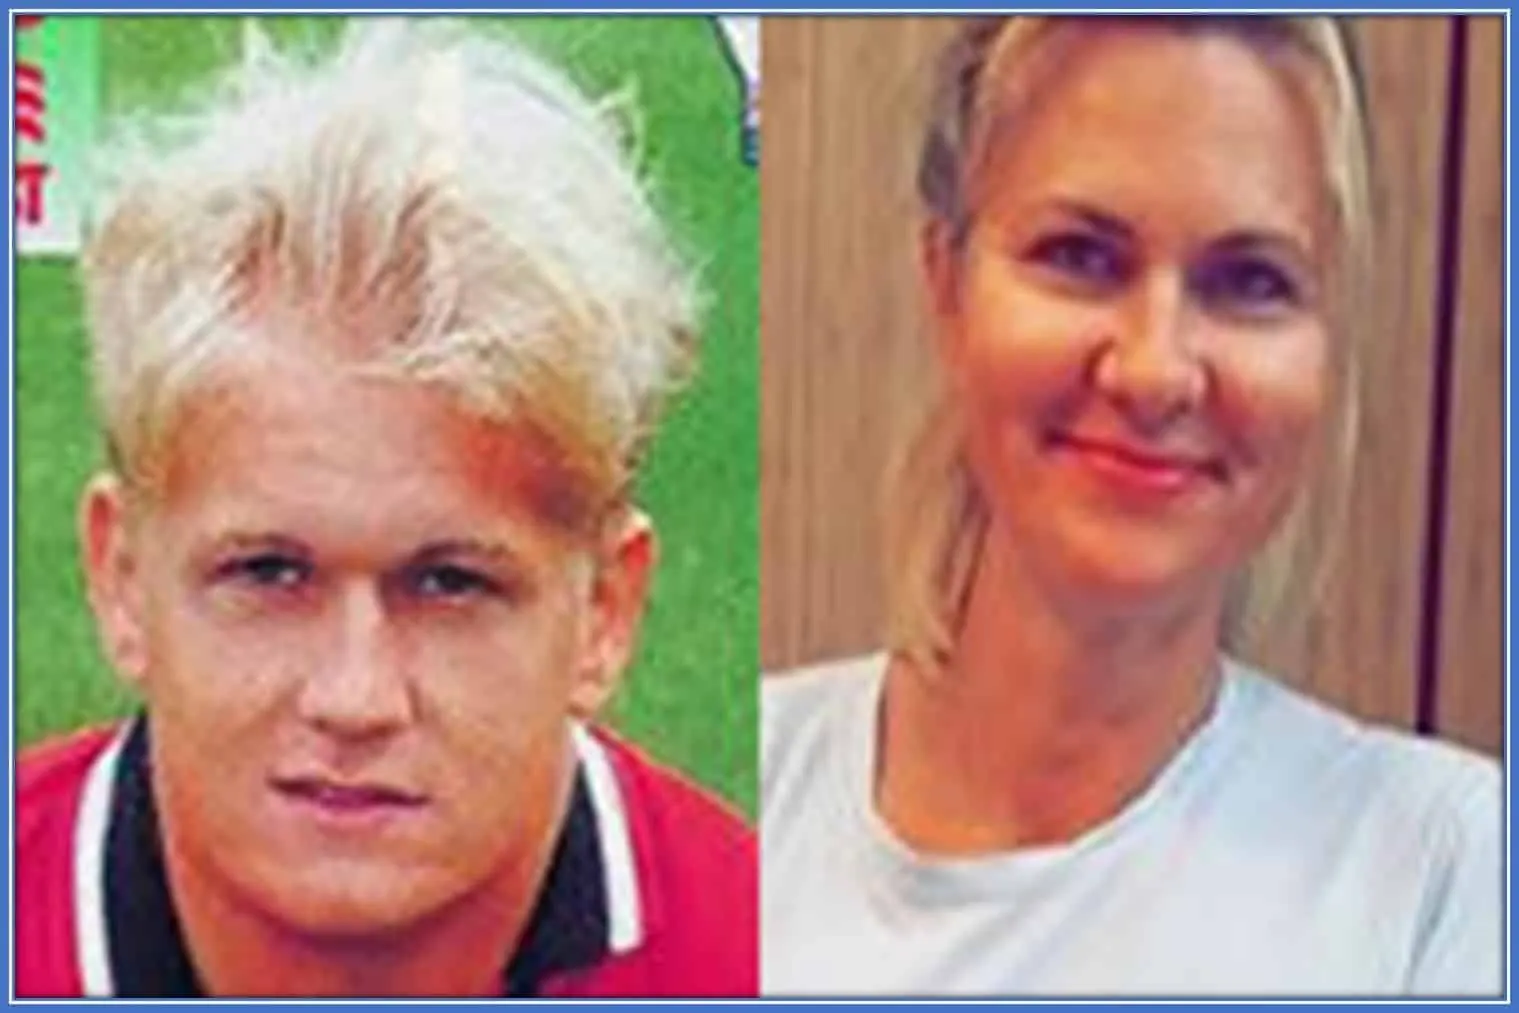 Meet Erling Haaland's parents - his father, Alf-Inge Håland and his mother, Gry Marita Braut.